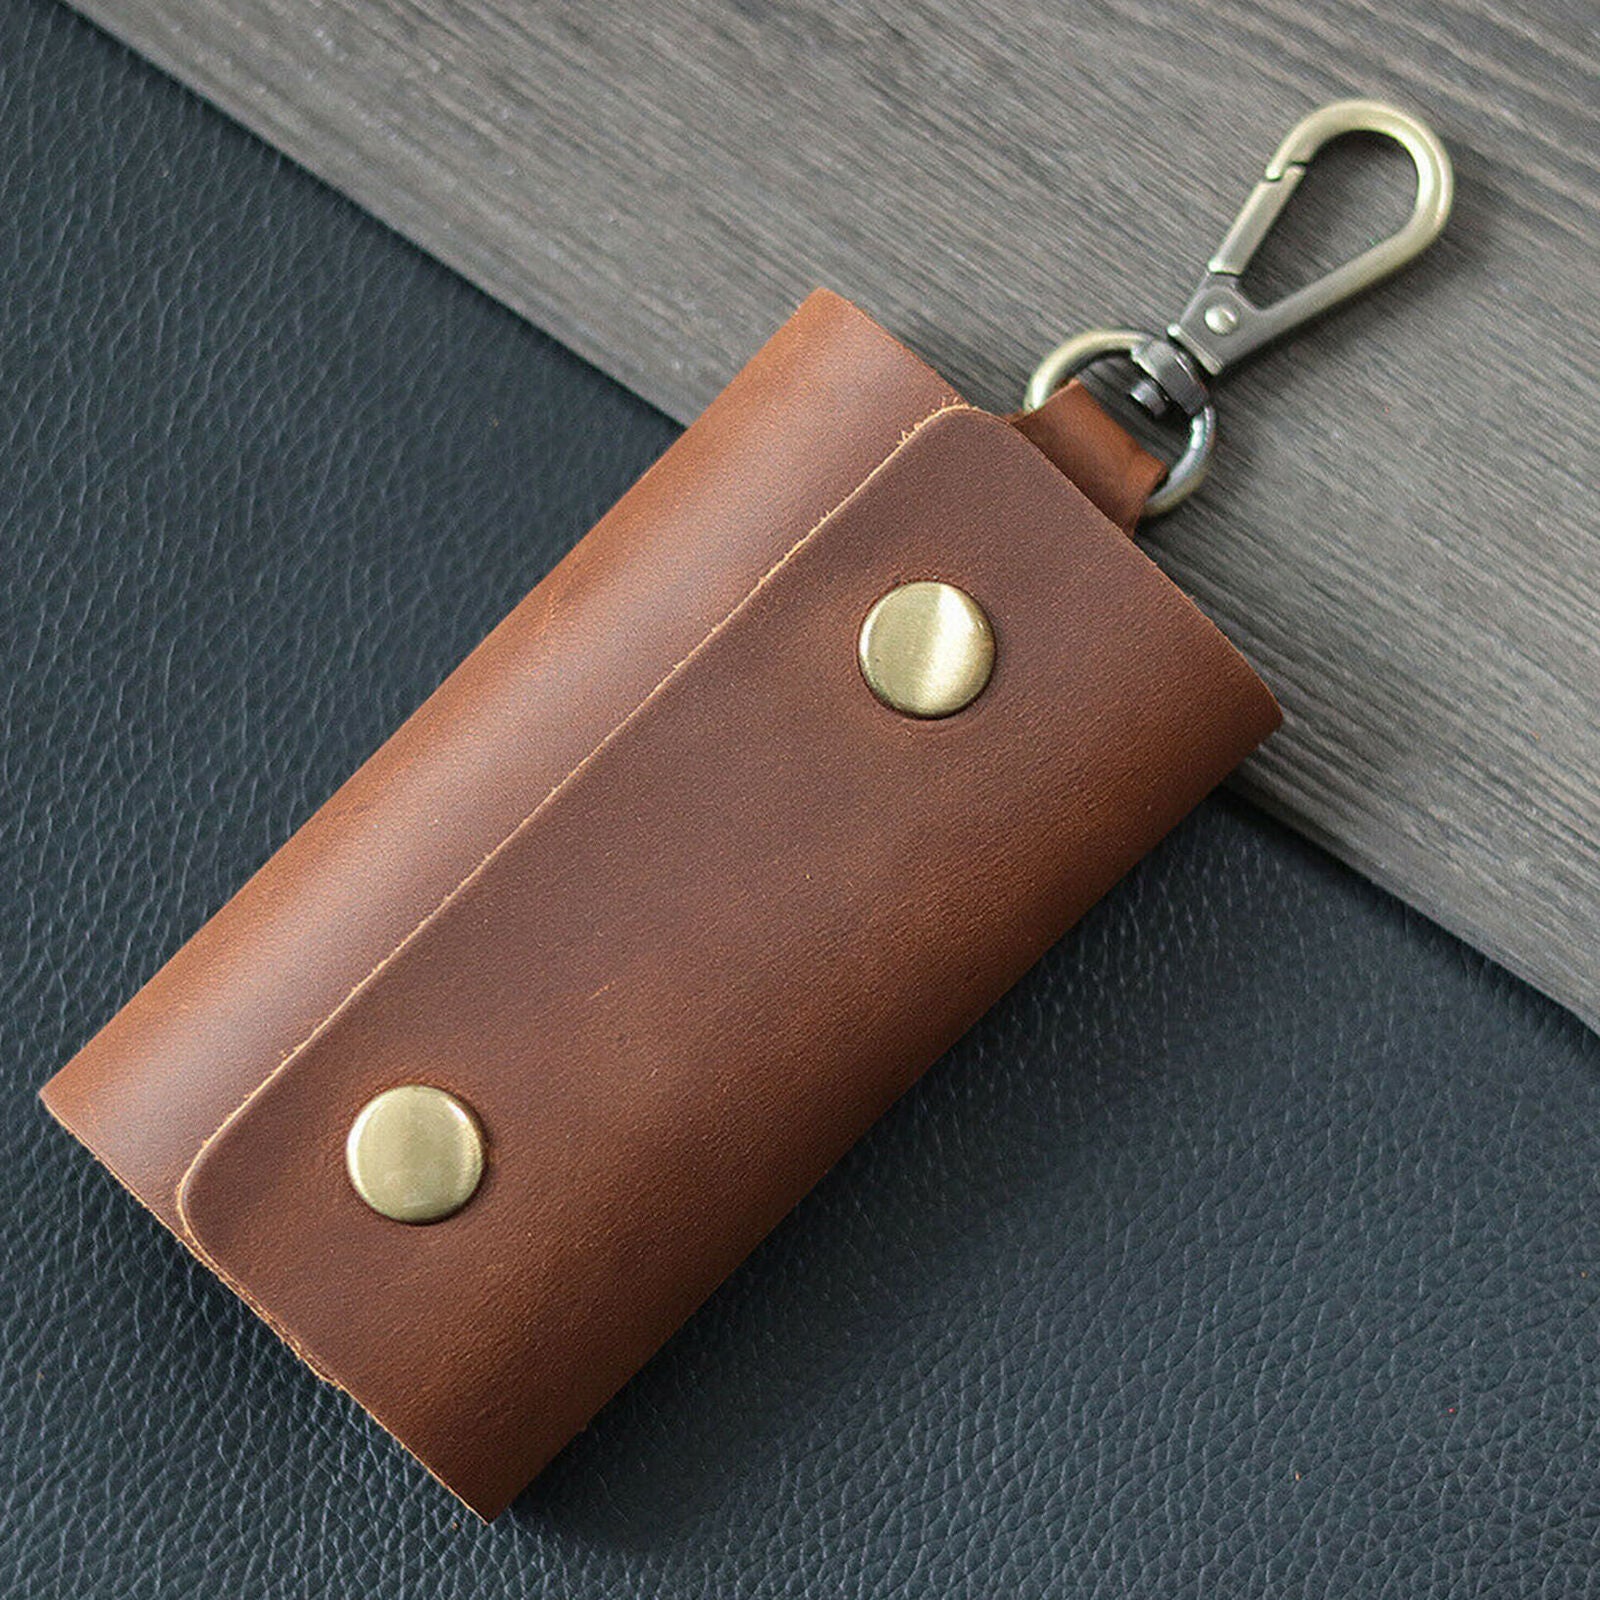 Multi Function Leather Car Key Chain Ring Holder Pouch Case Organizer Bag Wallet